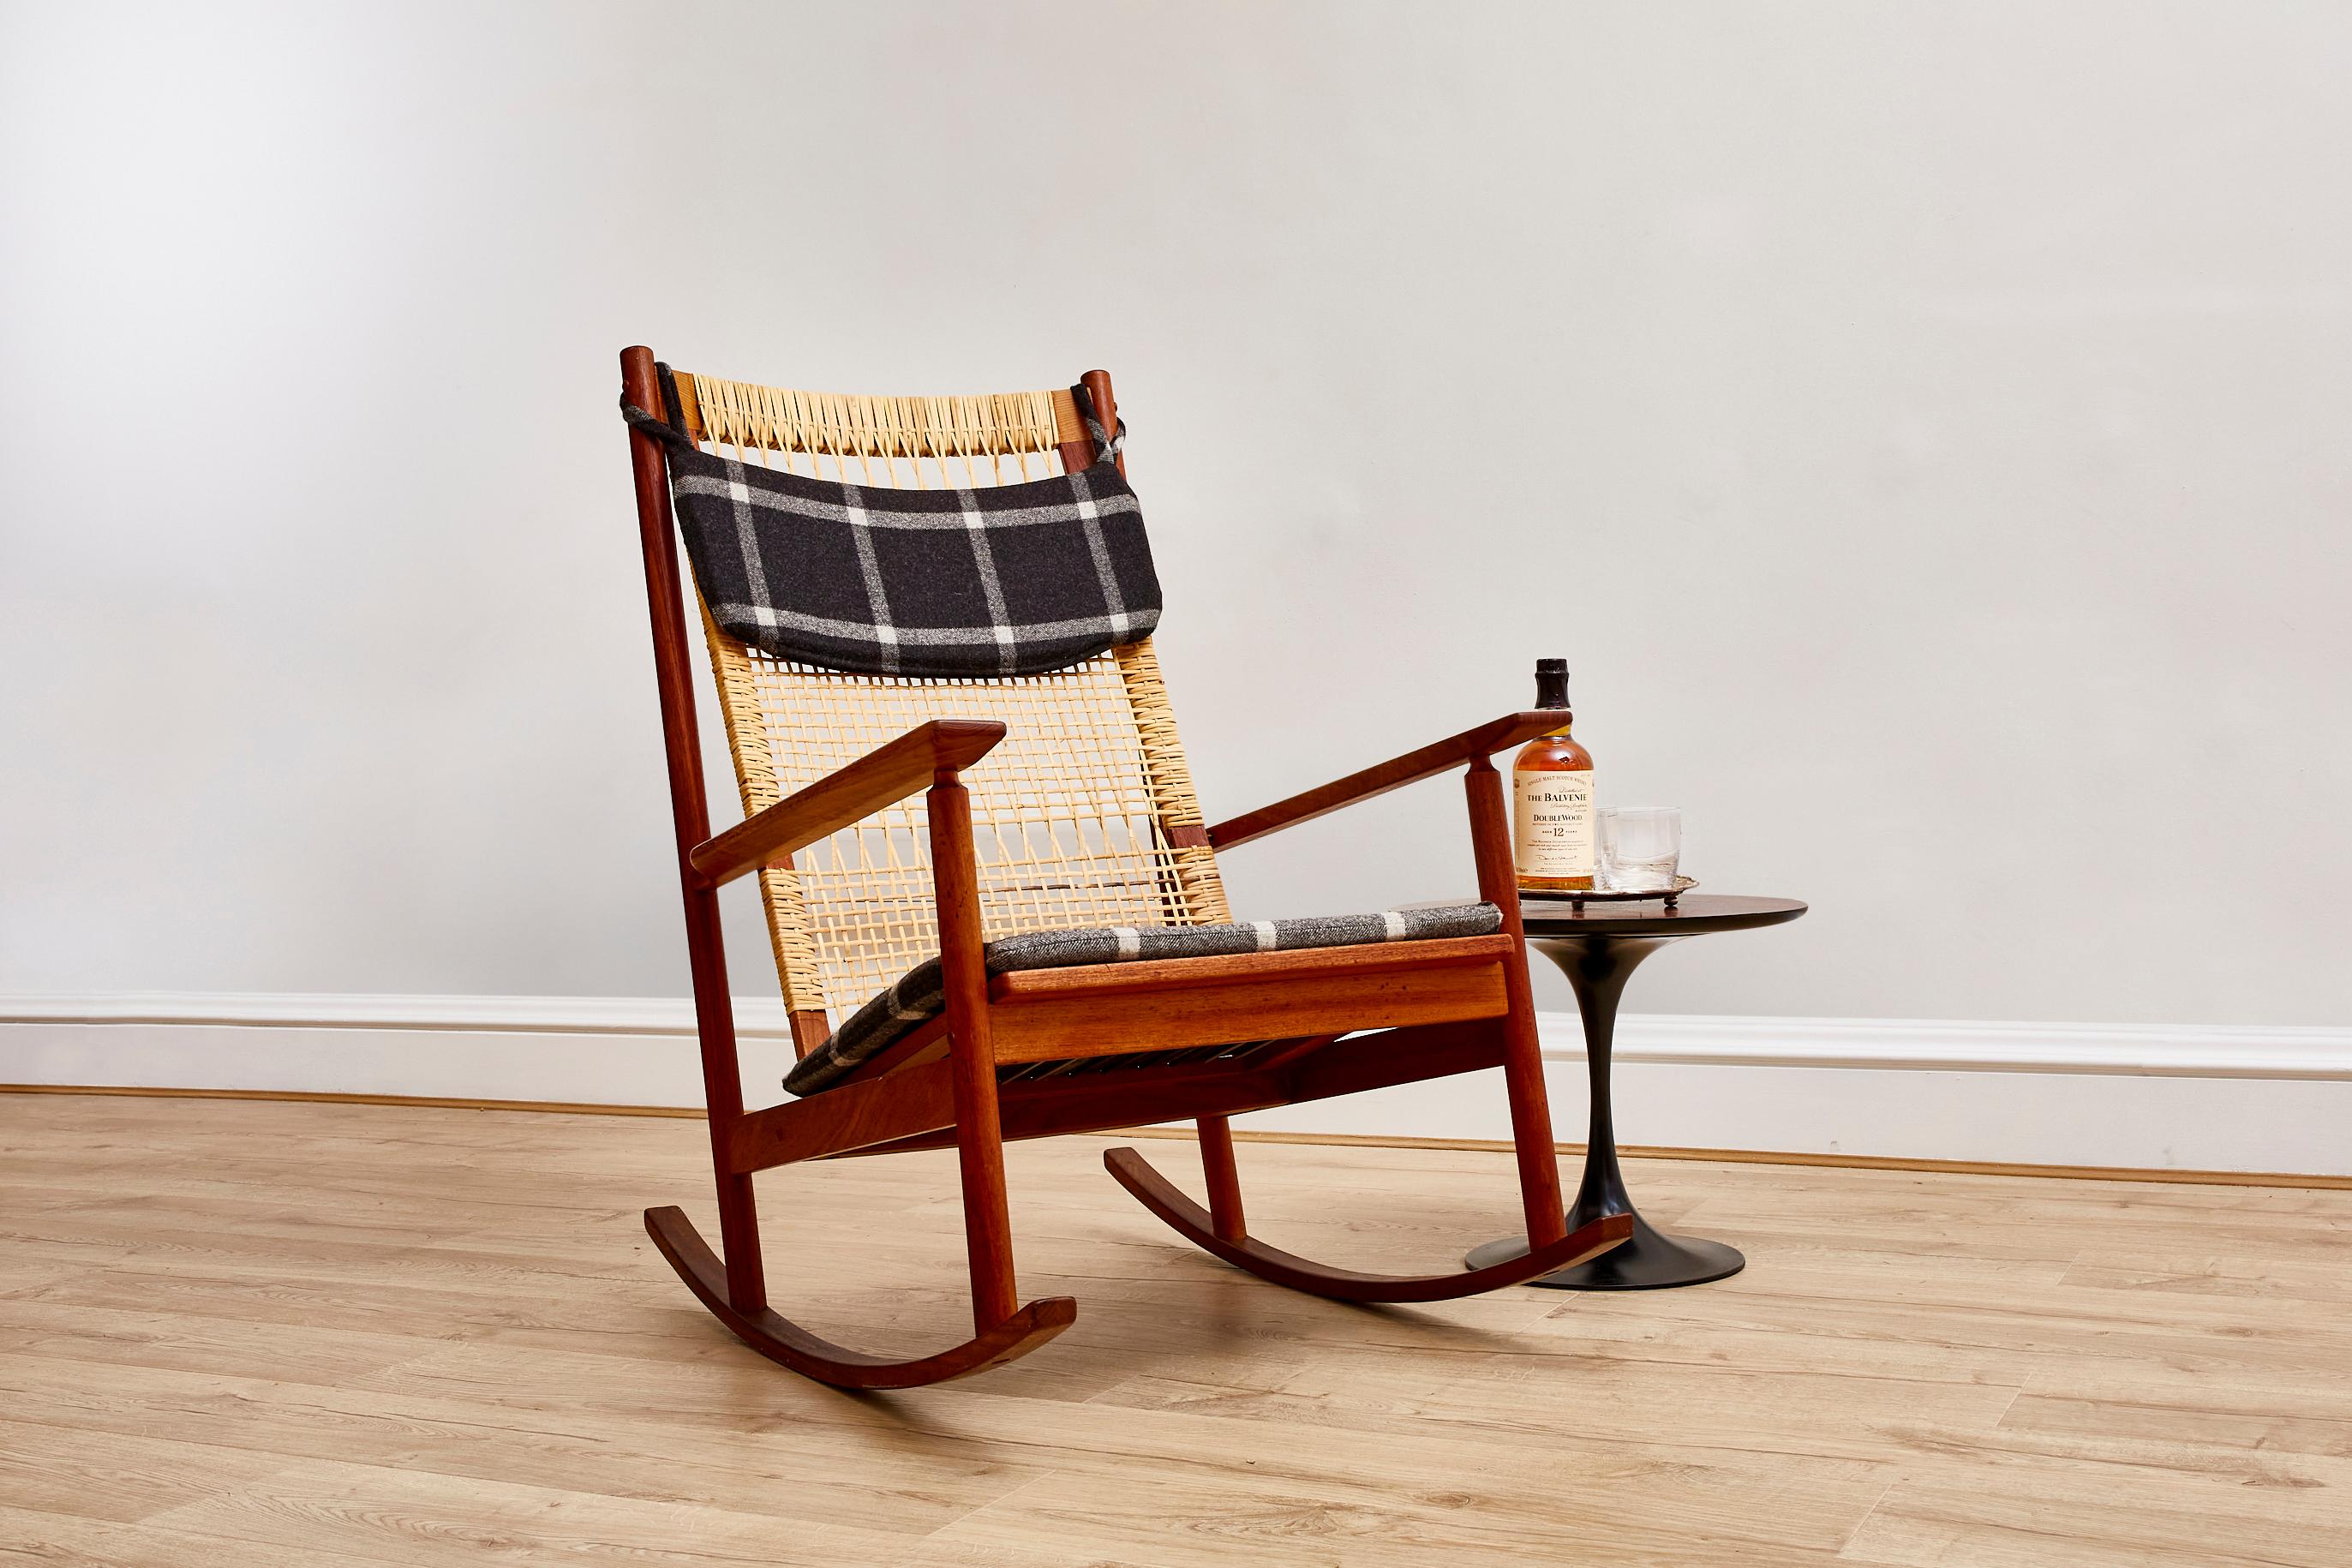 Experience the captivating allure of mid-century Danish design with this remarkable Teak and Cane Rocking Chair crafted by the acclaimed designer Hans Olsen for JK Denmark. Dating back to the 1950s, this chair embodies the essence of an era known